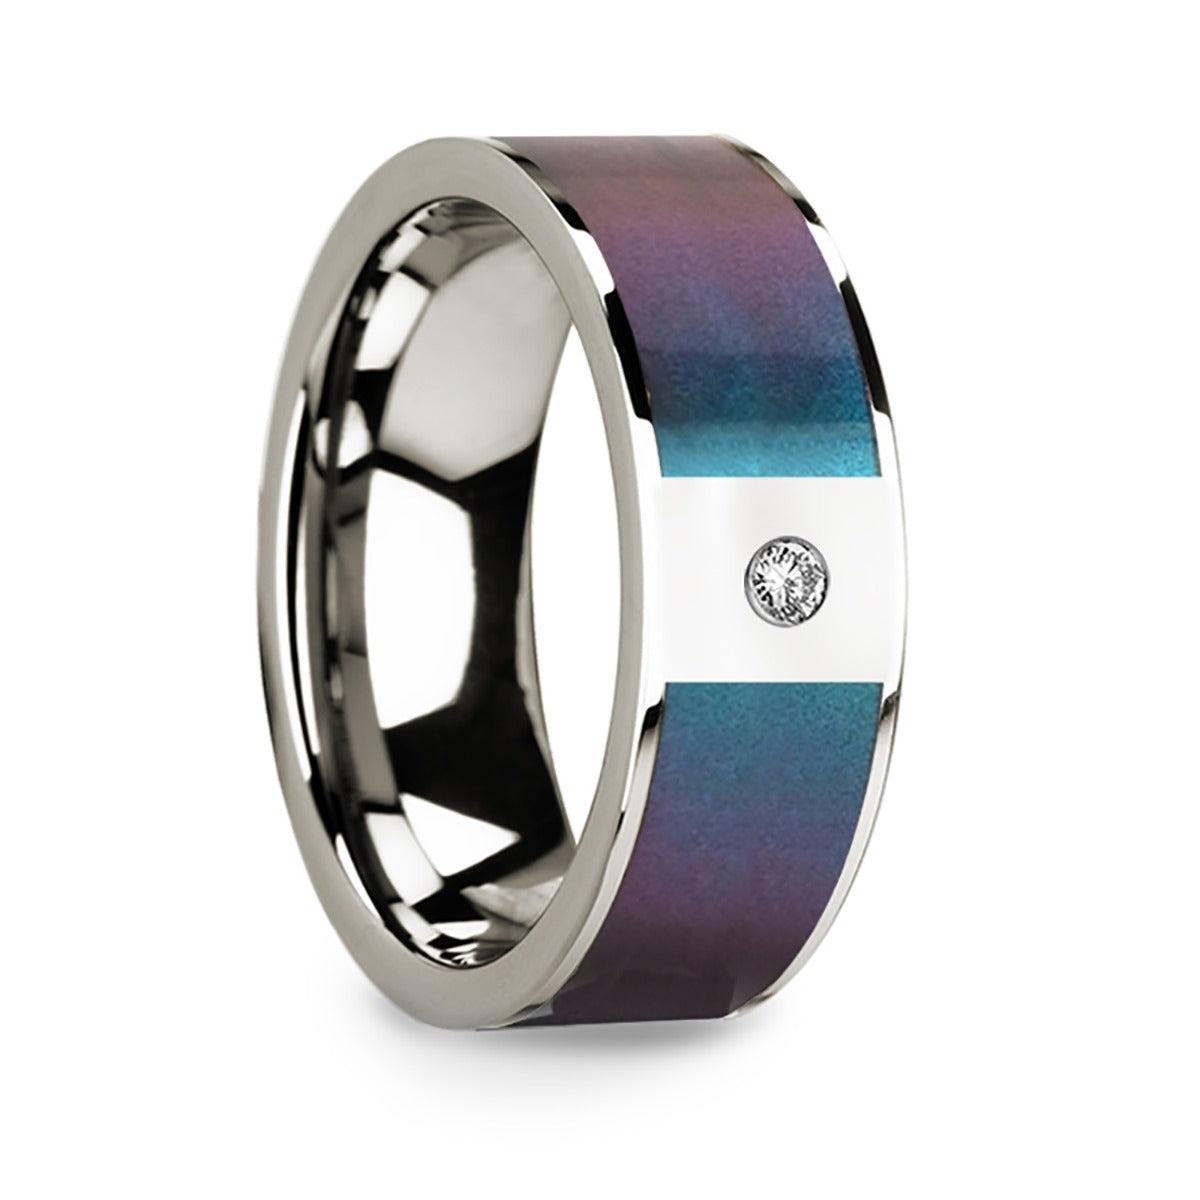 14k White Gold Men's Wedding Band with Blue & Purple Color Changing Inlay and Diamond